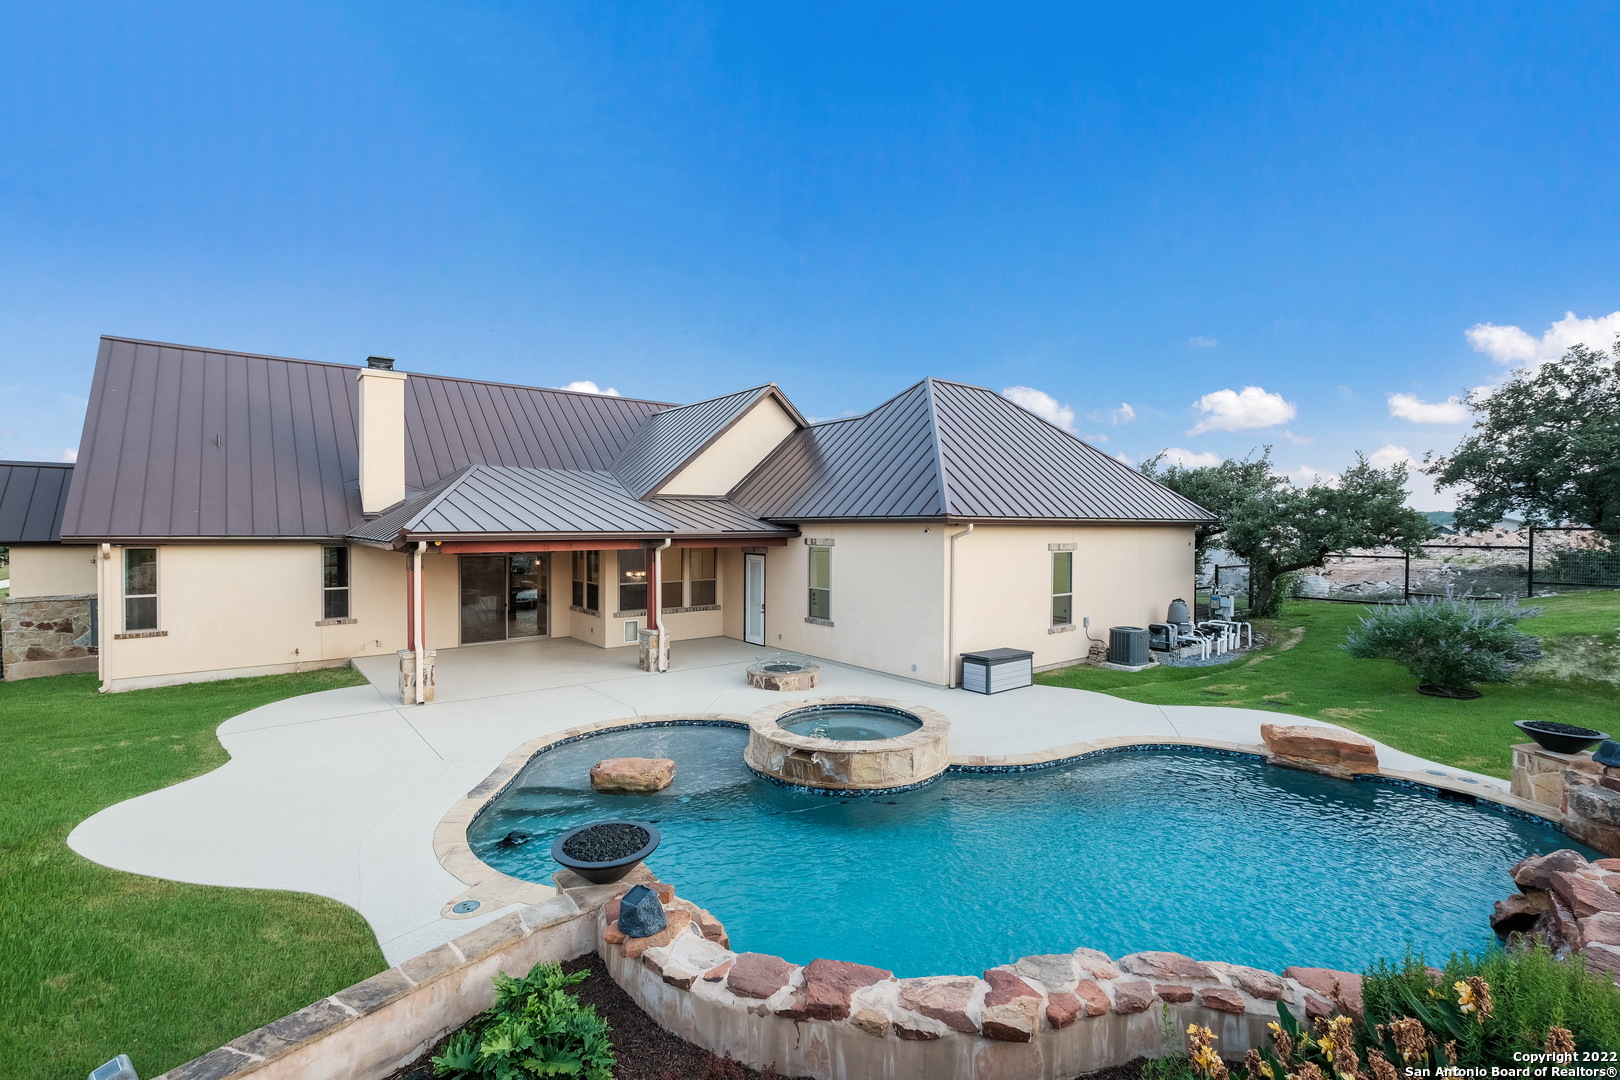 A meticulously maintained Texas Hill Country home features a luxurious Keith Zars Custom built in-ground pool with a luxury spa located within the prestigious Canyons at Scenic Loop! (KZP Lifestyle Protection Plan included & Paid in full until 2023). This 3 bedroom, 5 bath two story home boasts a captivating backyard oasis with breathtaking views of the evening sunset. The beautiful stone and stucco exterior features a metal roof that complements the well manicured front/back landscaping. This home provides plenty of parking space with a 3 car garage and attached oversized workshop that includes a climate control atmosphere w/ a half bath, LED lights, ceiling fans, and 13' ceilings. The open concept layout welcomes the seamless flow from the living room to the chef's kitchen and the spacious dining room that overlooks the gorgeous pool and spa out to the backyard. Custom upgrades throughout the home include the stone rock gas fireplace, travertine stone flooring, and upgraded carpet in the en suite bedrooms, walk-in luxury showers in primary/guest suite on main level.  Open study w/ custom built-in bookshelves and matching baseboards throughout give this home the modern, but rustic look. The thoughtfully designed Knotty Alder cabinetry looks gorgeous in the kitchen w/ the granite fusion countertop island w/ surrounding countertops appointed with leathered granite, top-rated stainless steel appliances and black granite double sink w/ touchless faucet give this gourmet kitchen its finishing touch. The upstairs features the amazing media room equipped with the top-of-the- line surround sound and 110" movie screen along with all 4K video and receiver components, professionally installed and designed by Magnolia Audio/Video. Off of the media room, there is large game room or (use it as flex space), and spare third bedroom with a separate bathroom that includes an oversized soaker tub. Too many upgrades to list, please see property feature list in MLS additional information section. Easy access to Shops at La Cantera, The Rim, restaurants, and major highways IH-10/1604. Schedule your showing today and make this your dream home!